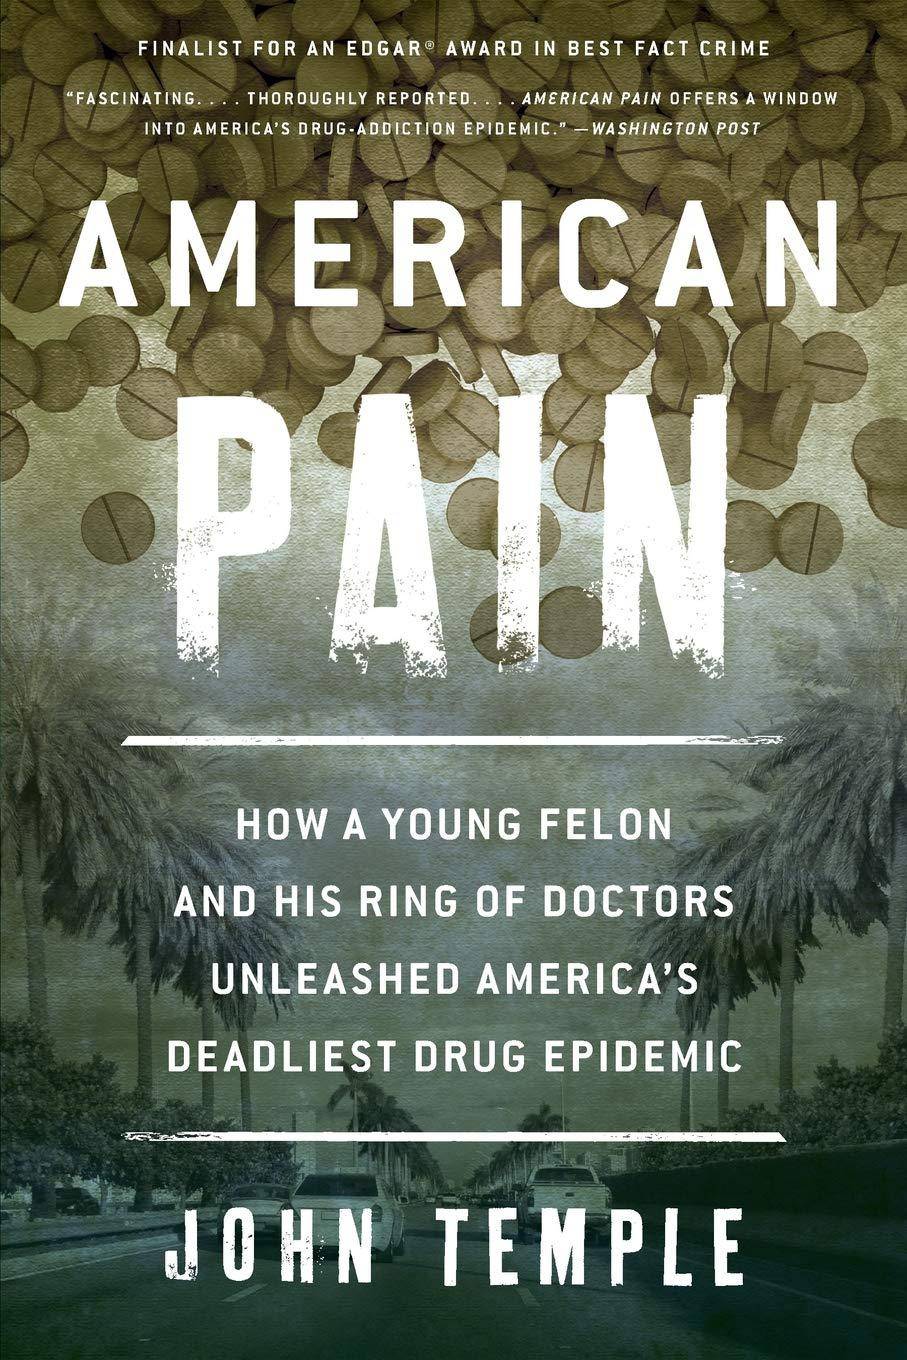 American Pain: How a Young Felon and His Ring of Doctors Unleash - SureShot Books Publishing LLC